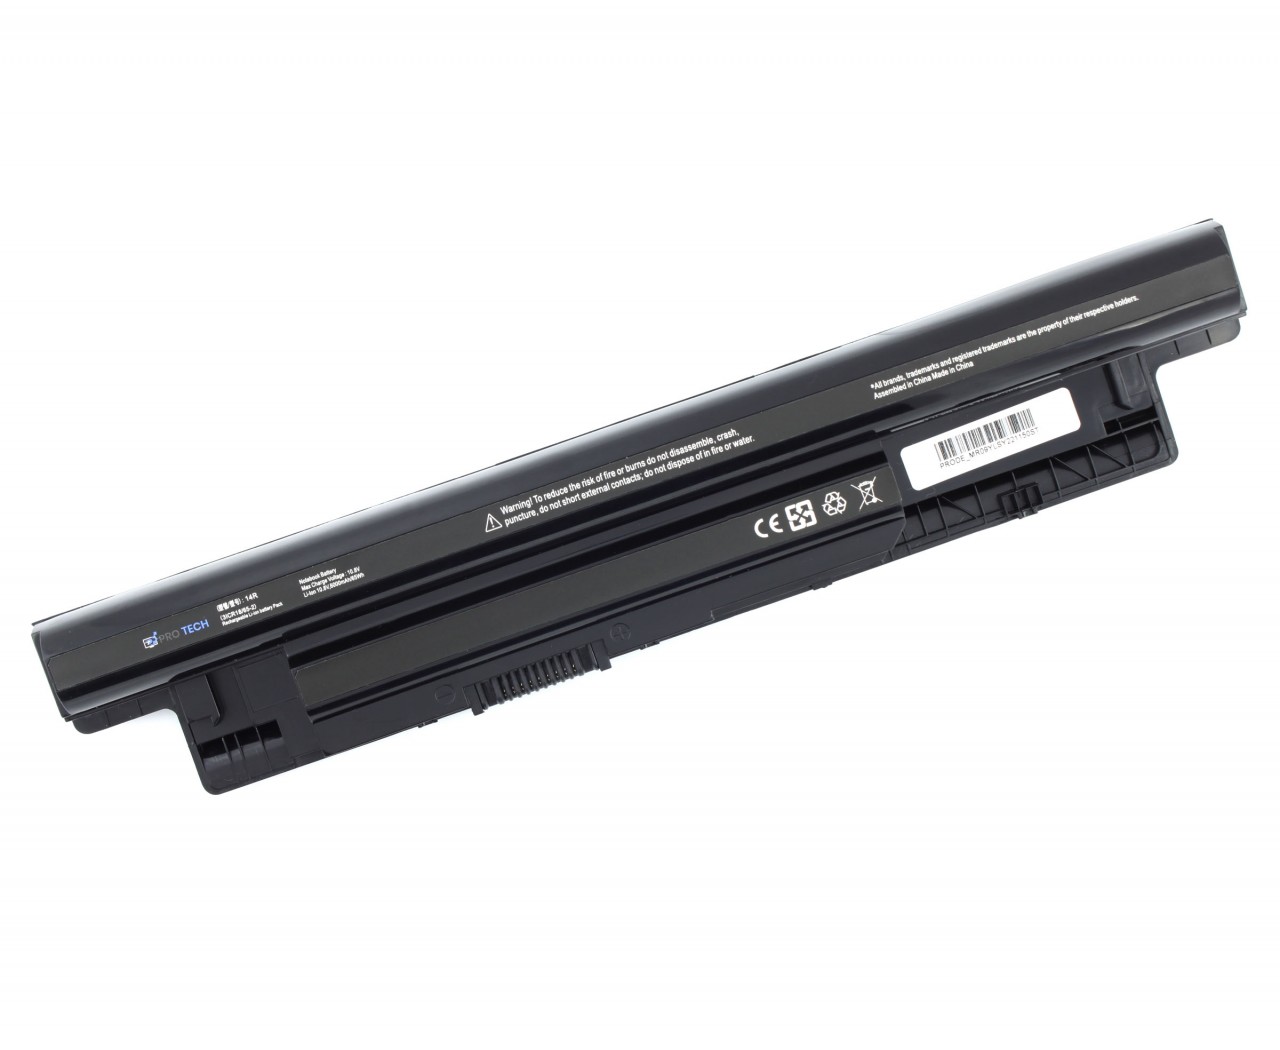 Baterie Dell Inspiron 5437 65Wh Protech High Quality Replacement 5437 imagine noua reconect.ro